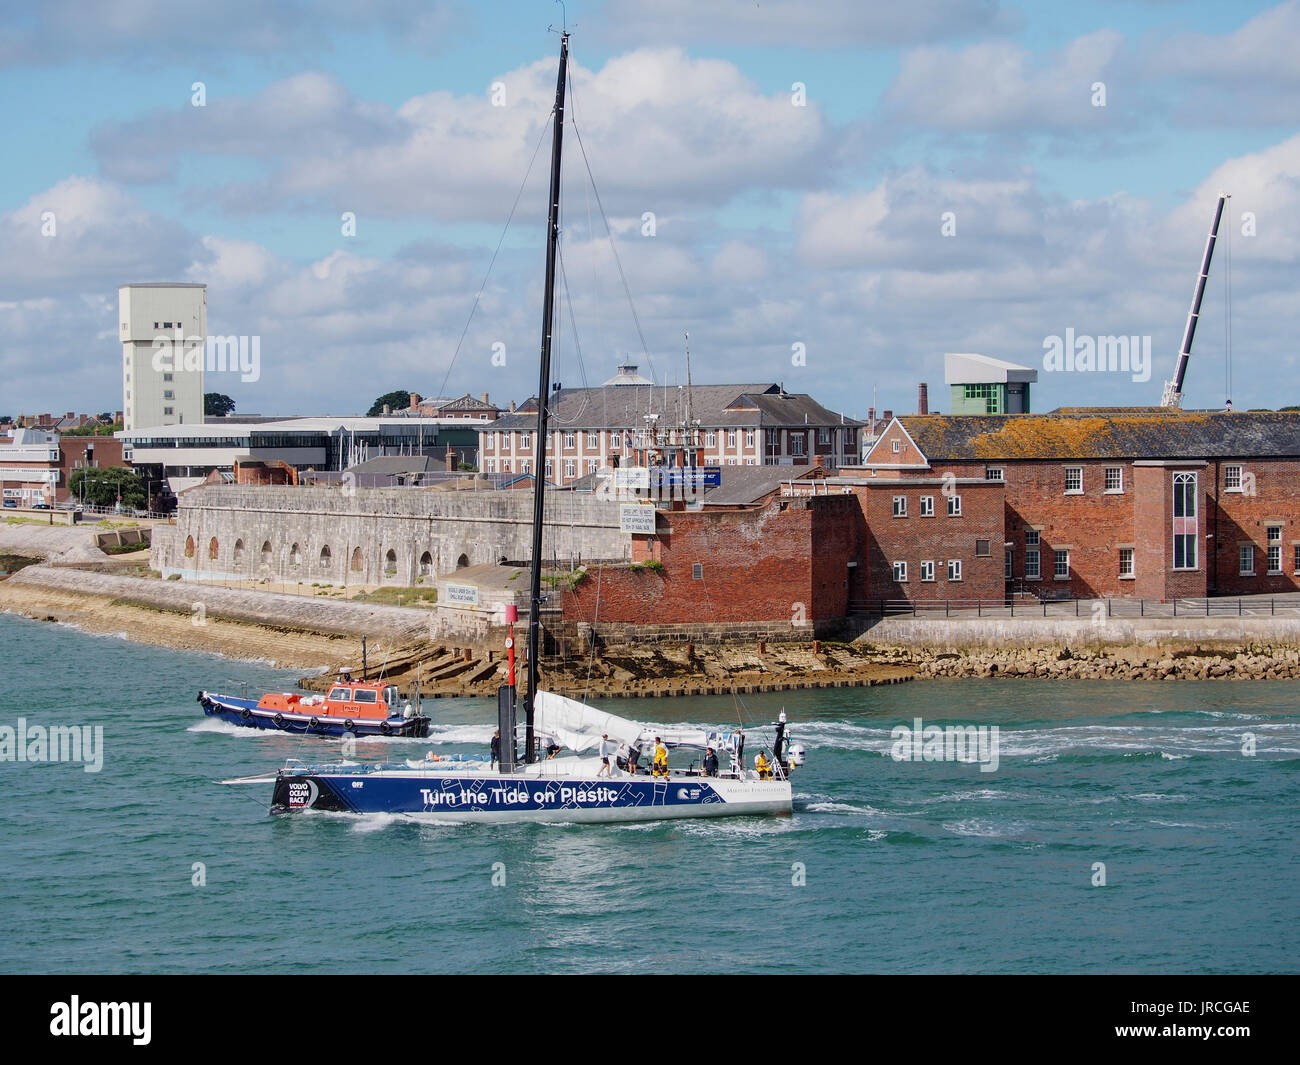 The yacht of team 'Turn the tide on Plastic' preparing for the Volvo ocean race in Portsmouth Harbour Stock Photo